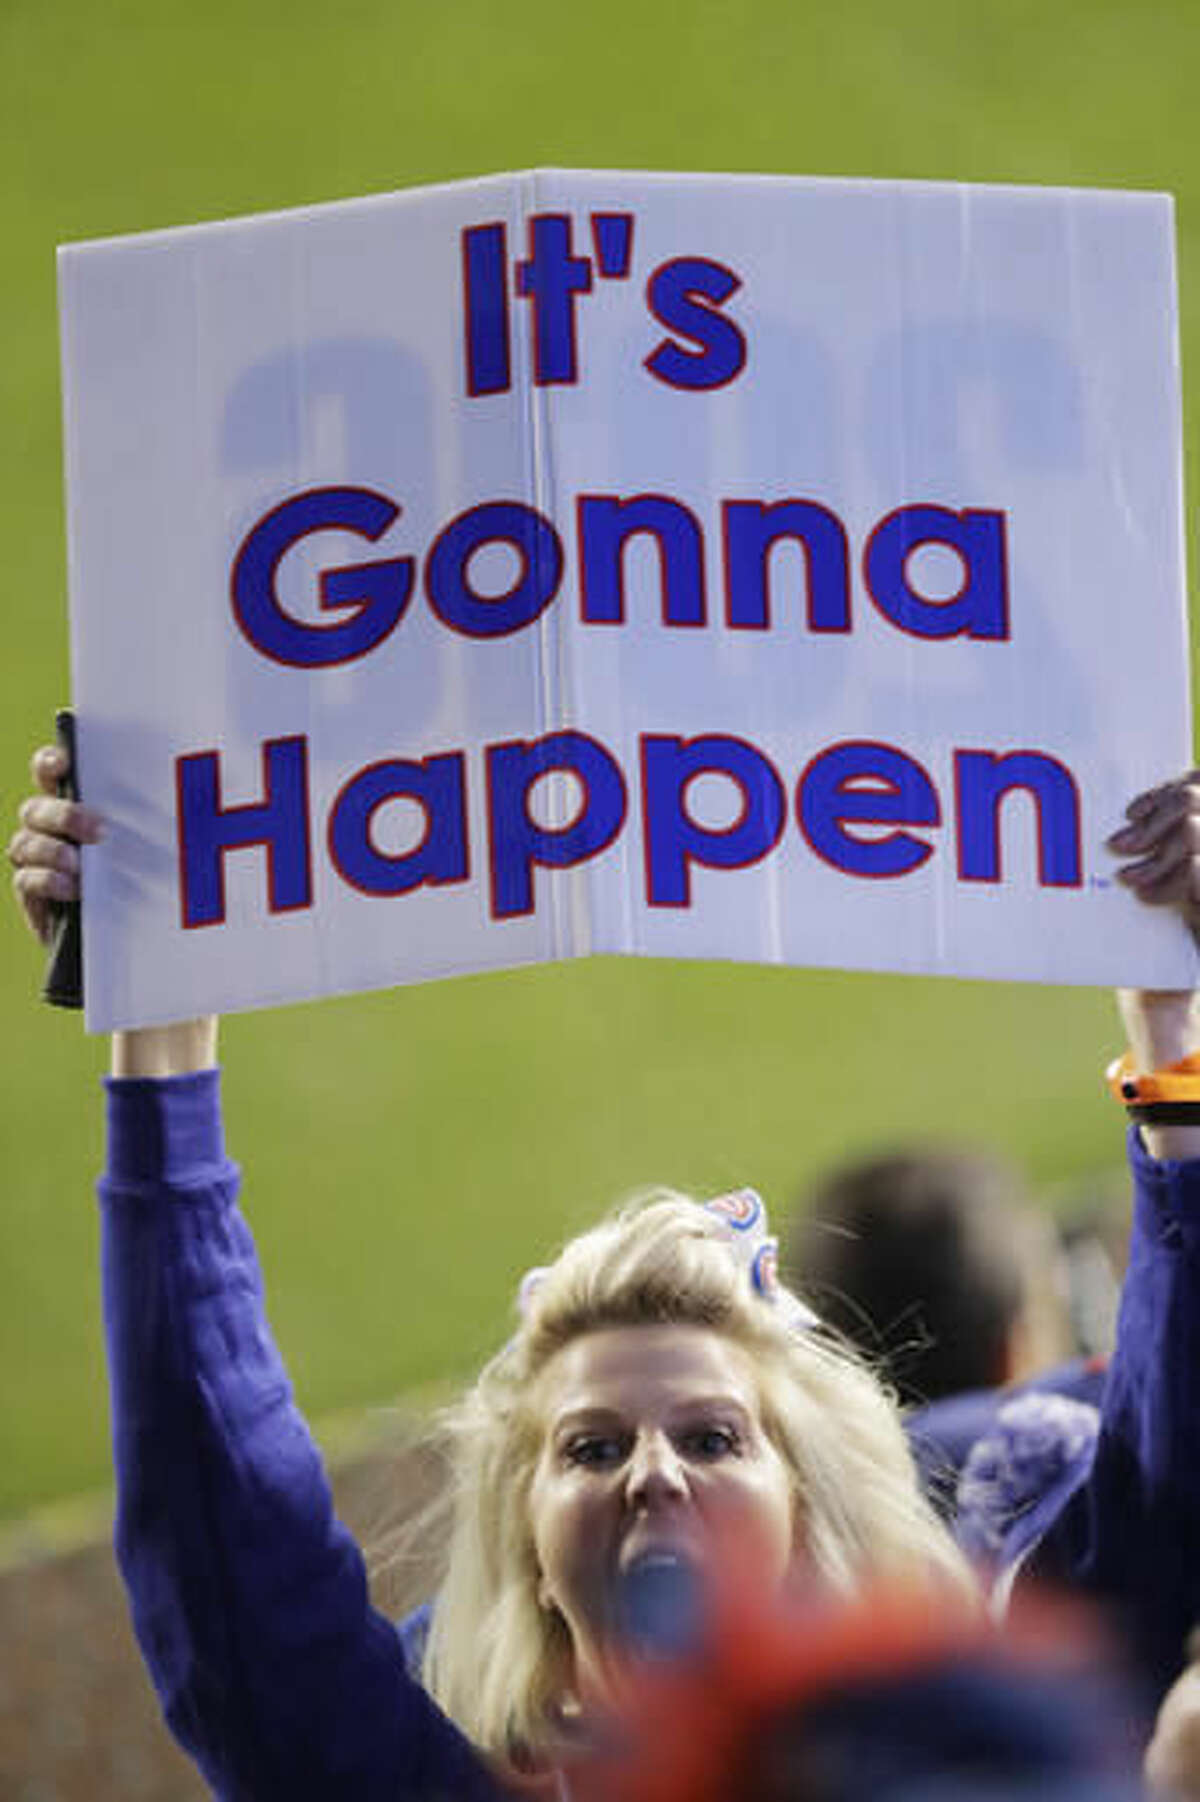 A Chicago Cubs fan holds up a sign during the eighth inning of Game 6 of the National League baseball championship series between the Chicago Cubs and the Los Angeles Dodgers Saturday, Oct. 22, 2016, in Chicago. (AP Photo/Charles Rex Arbogast)